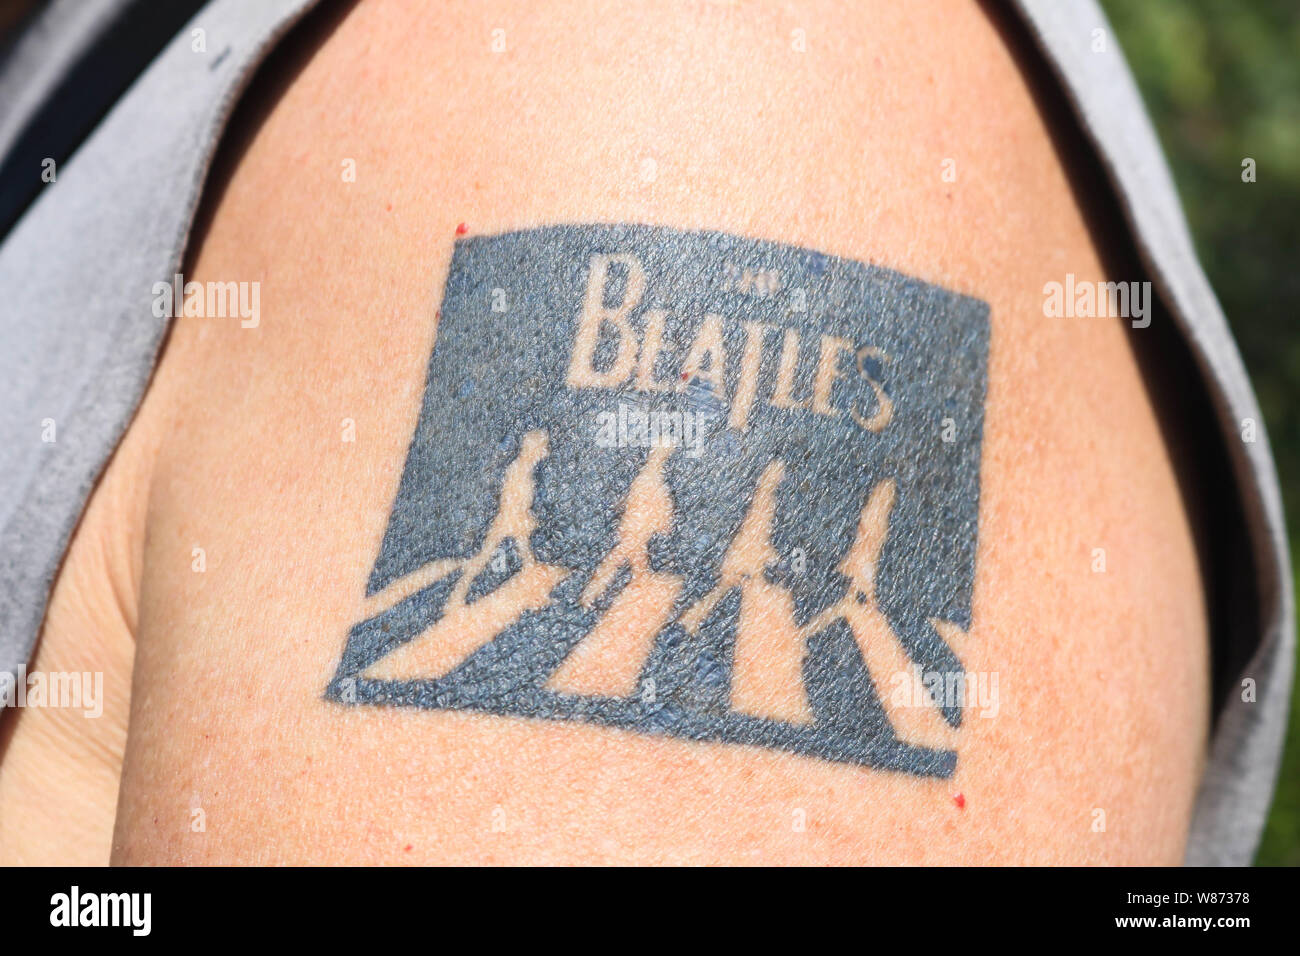 Tattoo You Album High Resolution Stock Photography And Images Alamy